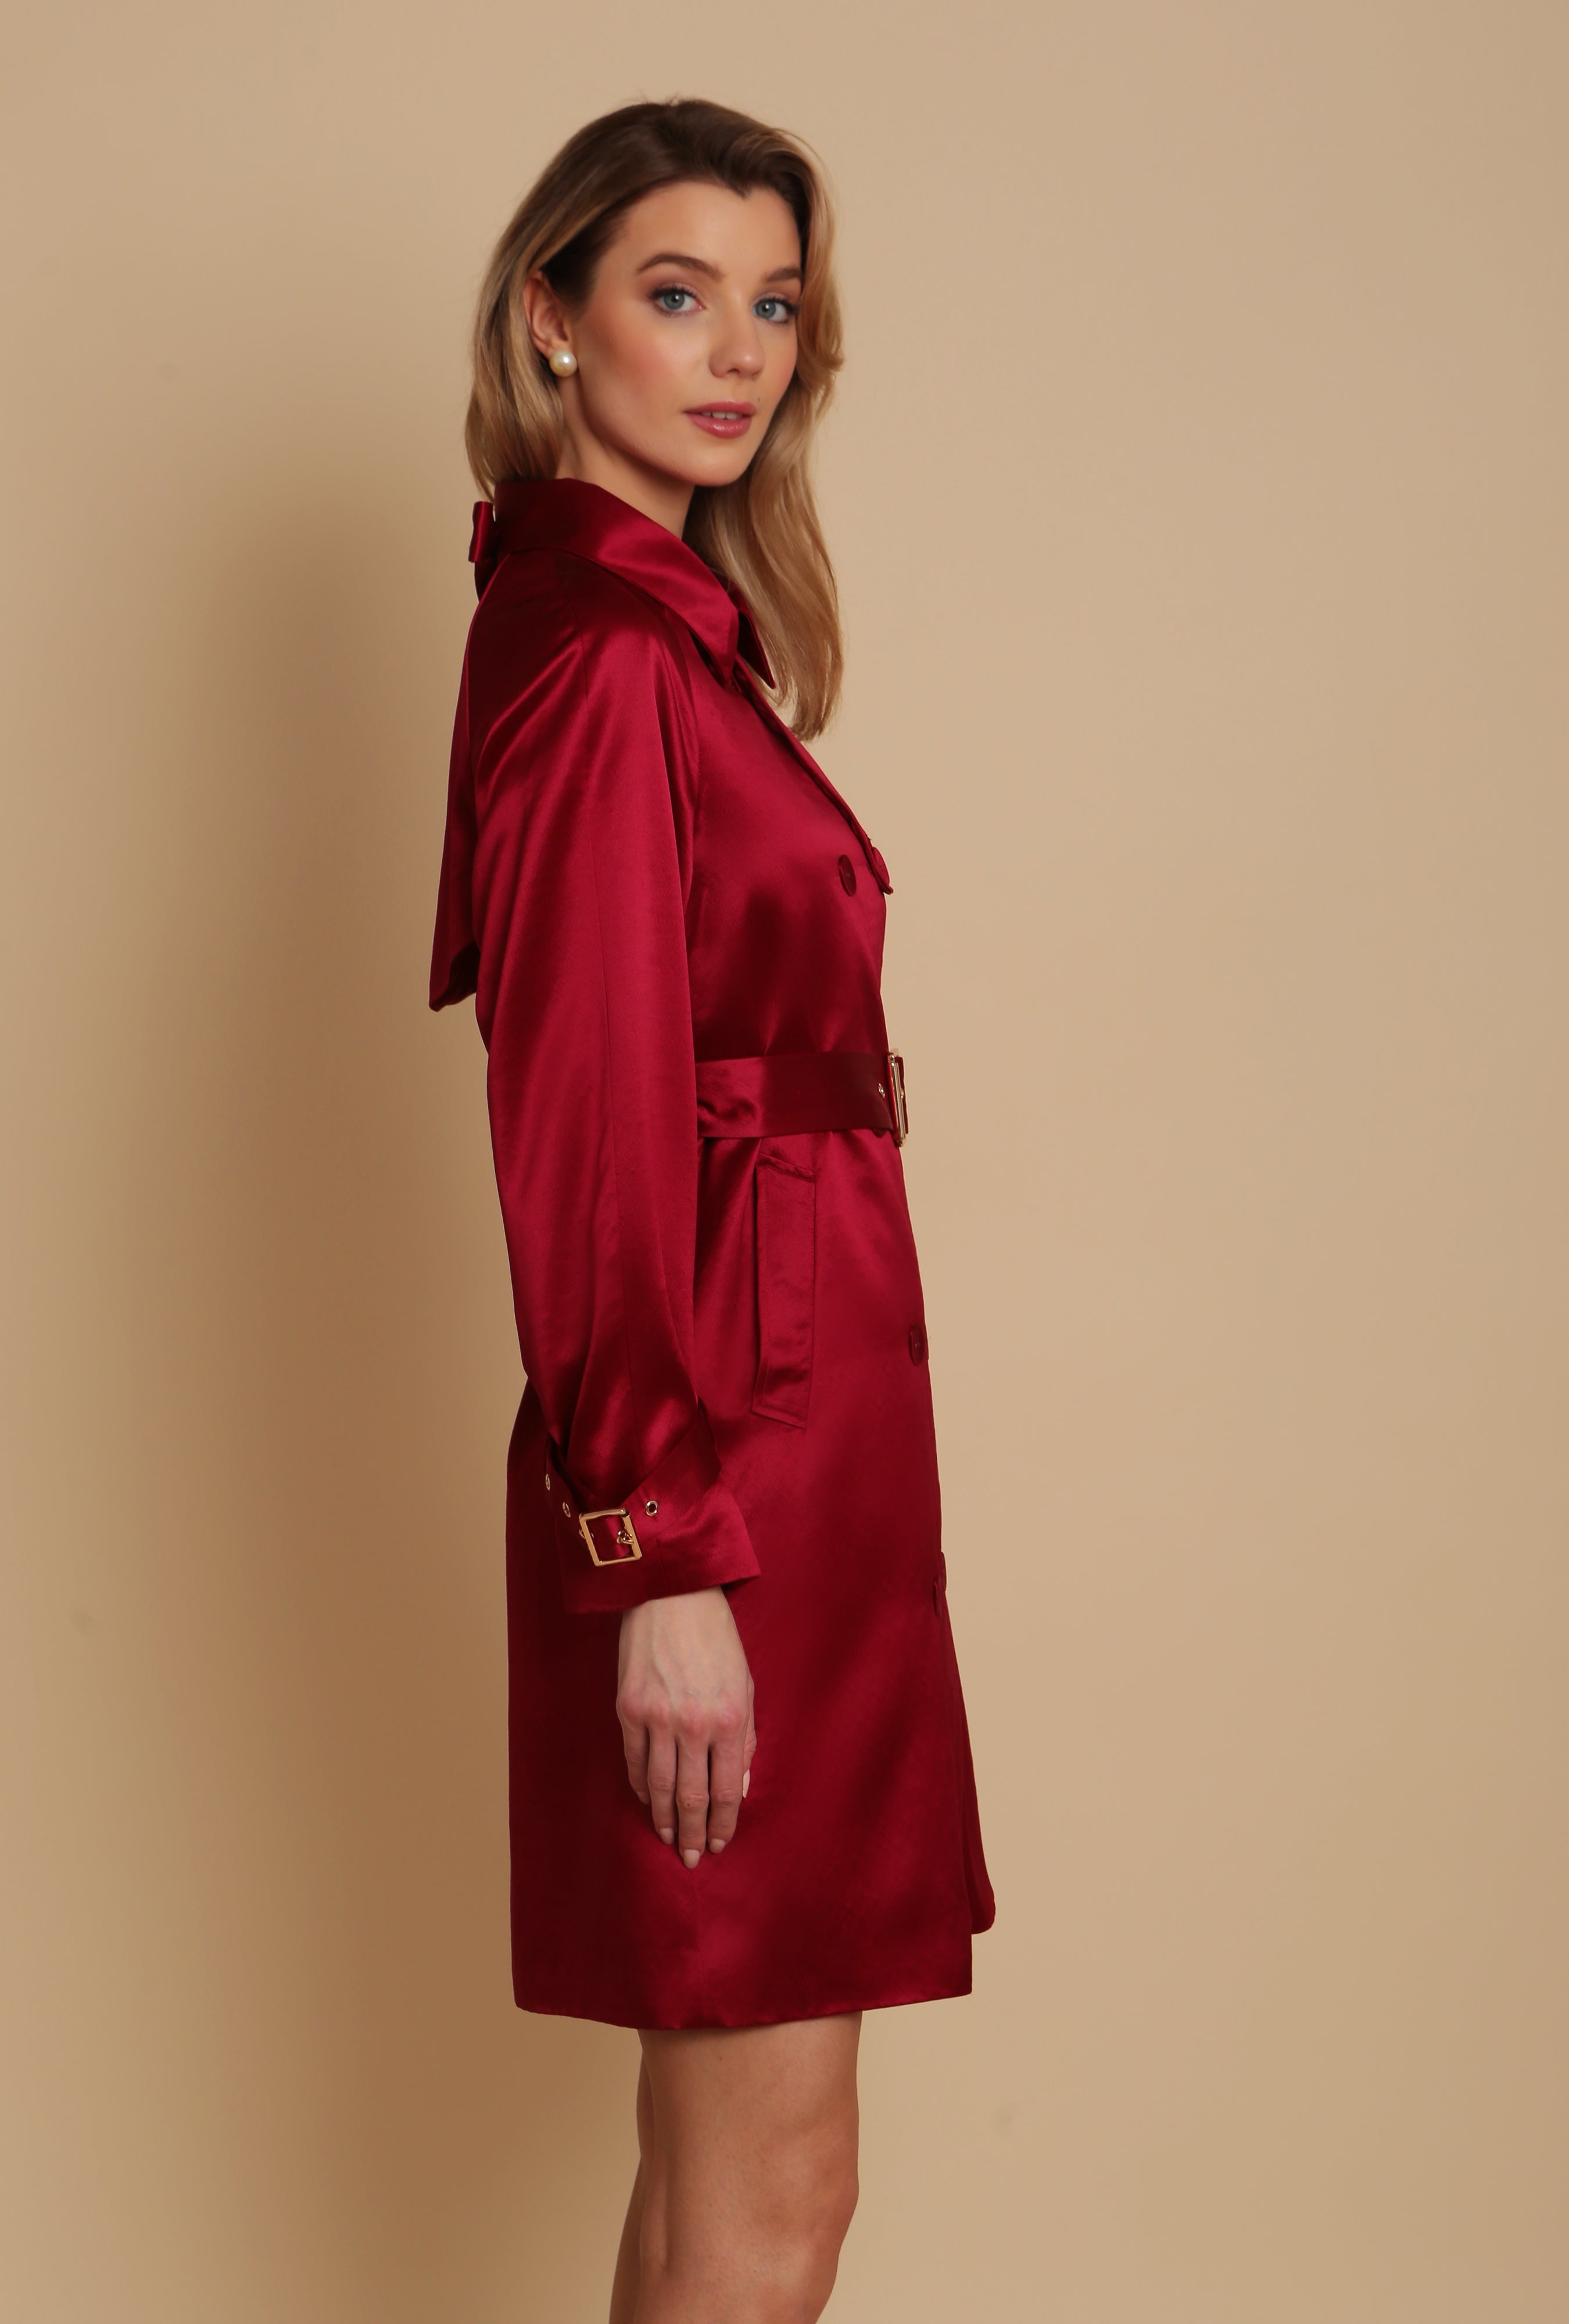 'La Dolce Vita' Wool and Silk Trench Coat in Rosso